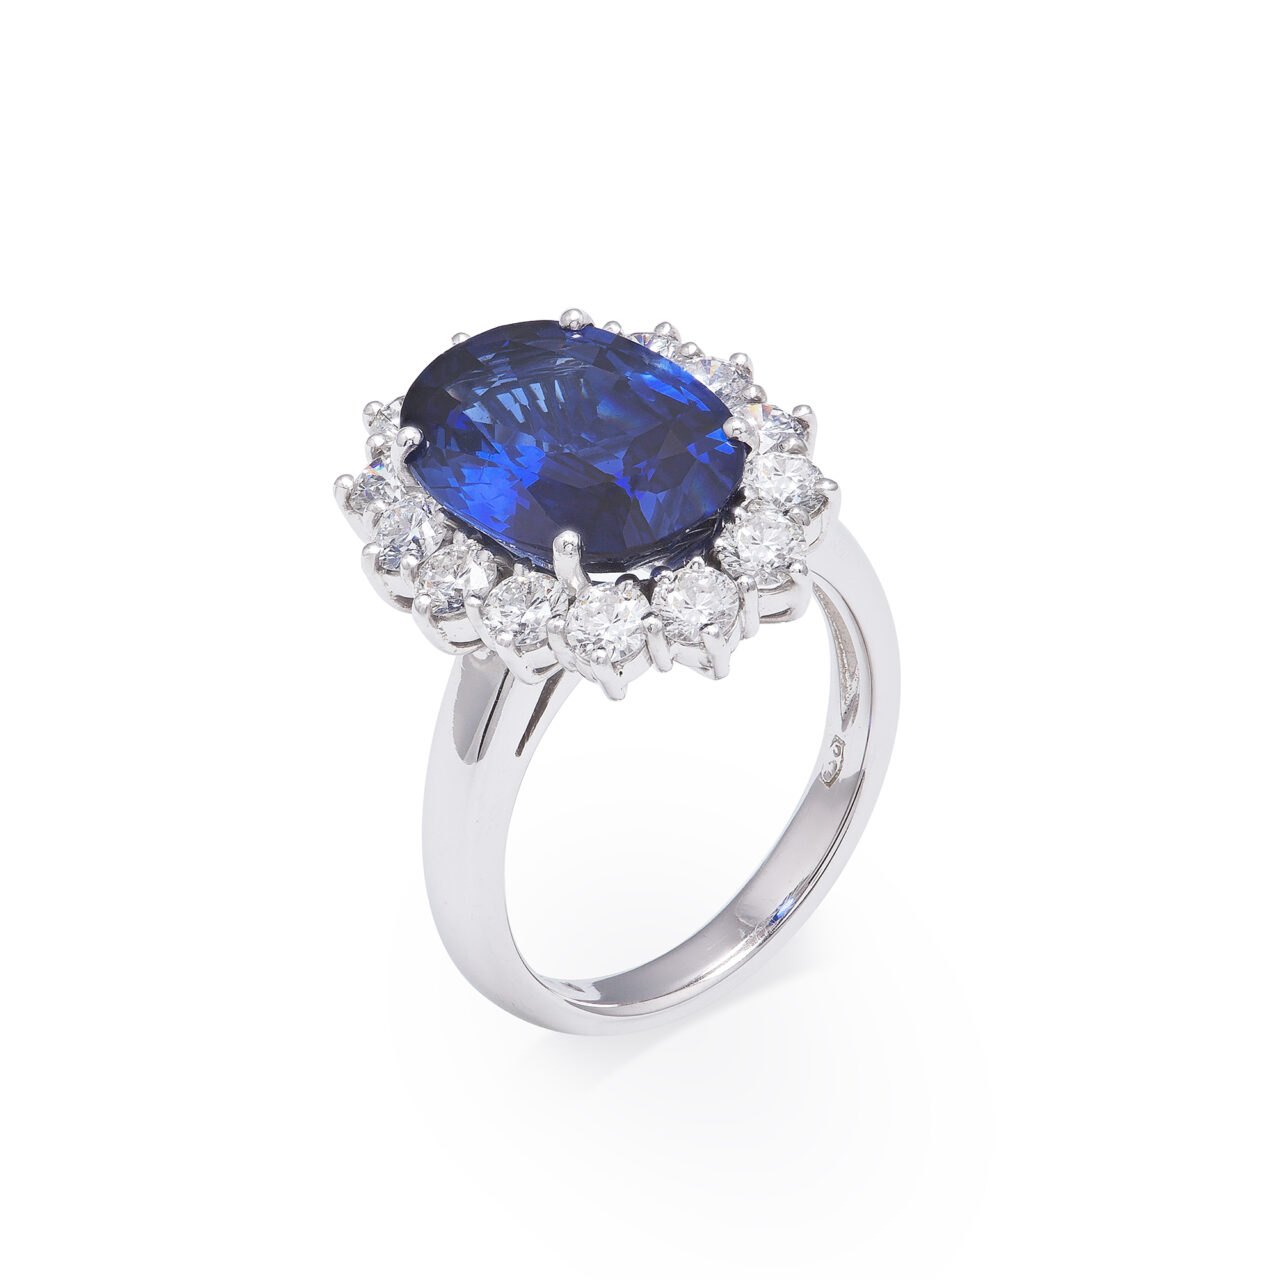 White gold ring with Burmese sapphire and diamonds